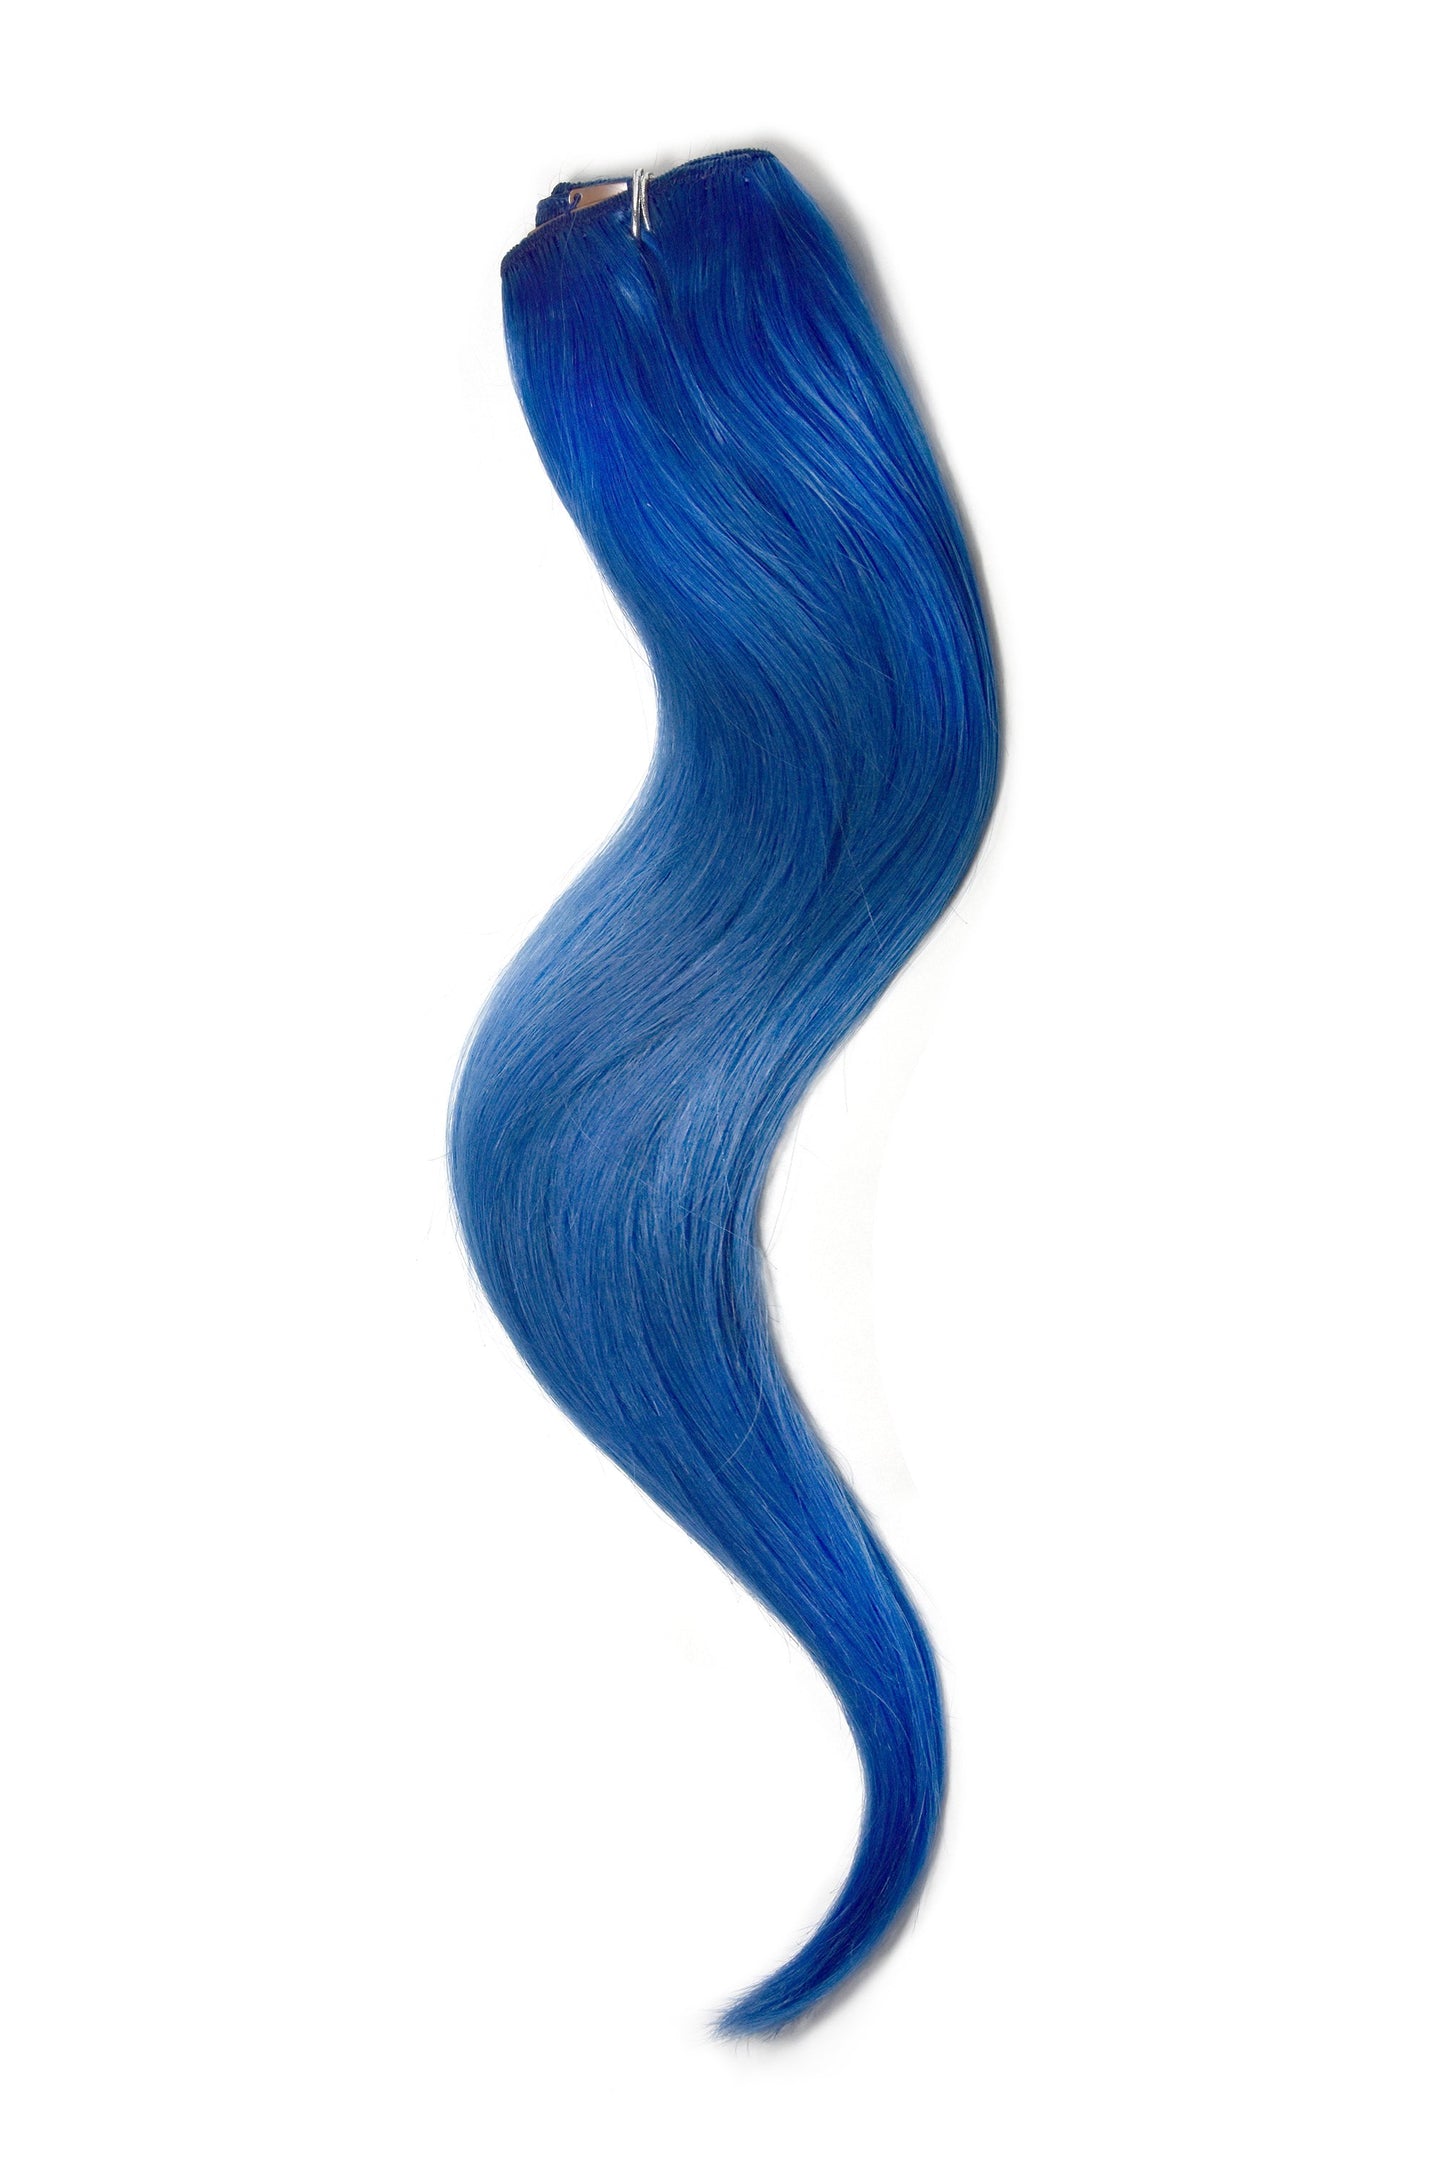 One Piece Top-up Remy Clip in Human Hair Extensions - Blue